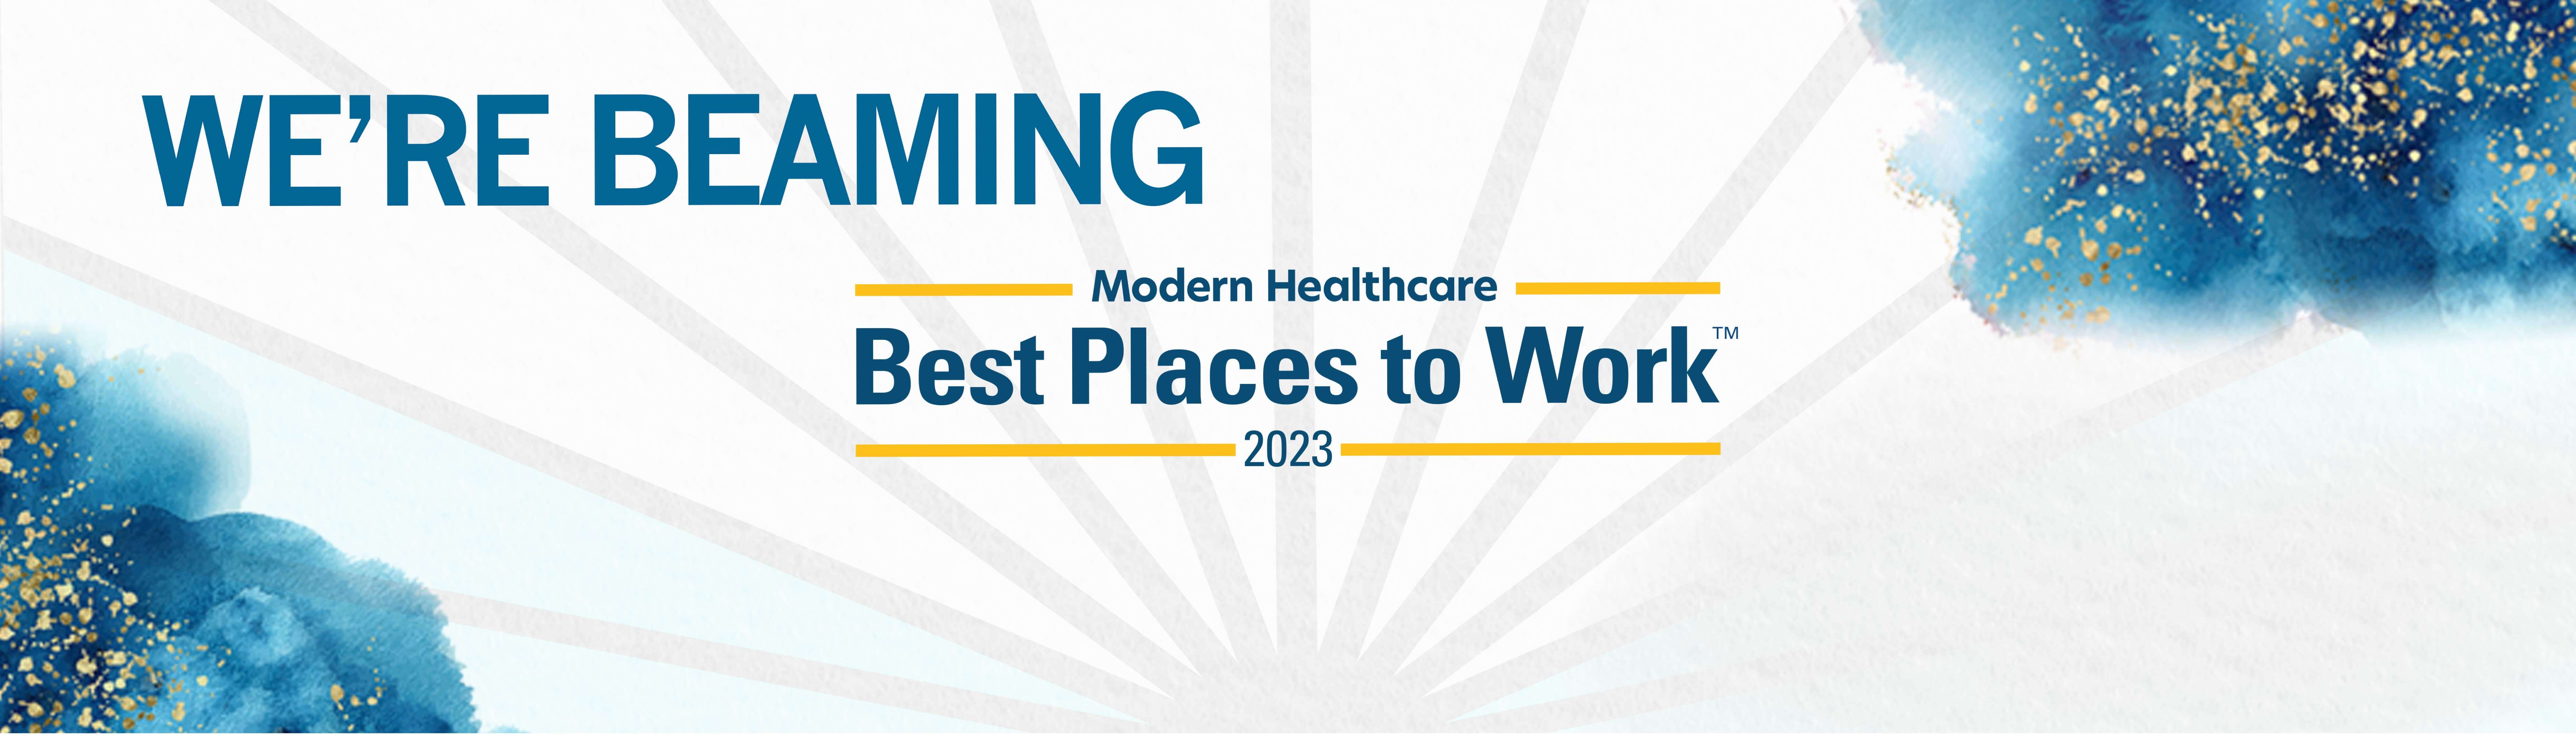 Modern Healthcare - Best Places to Work